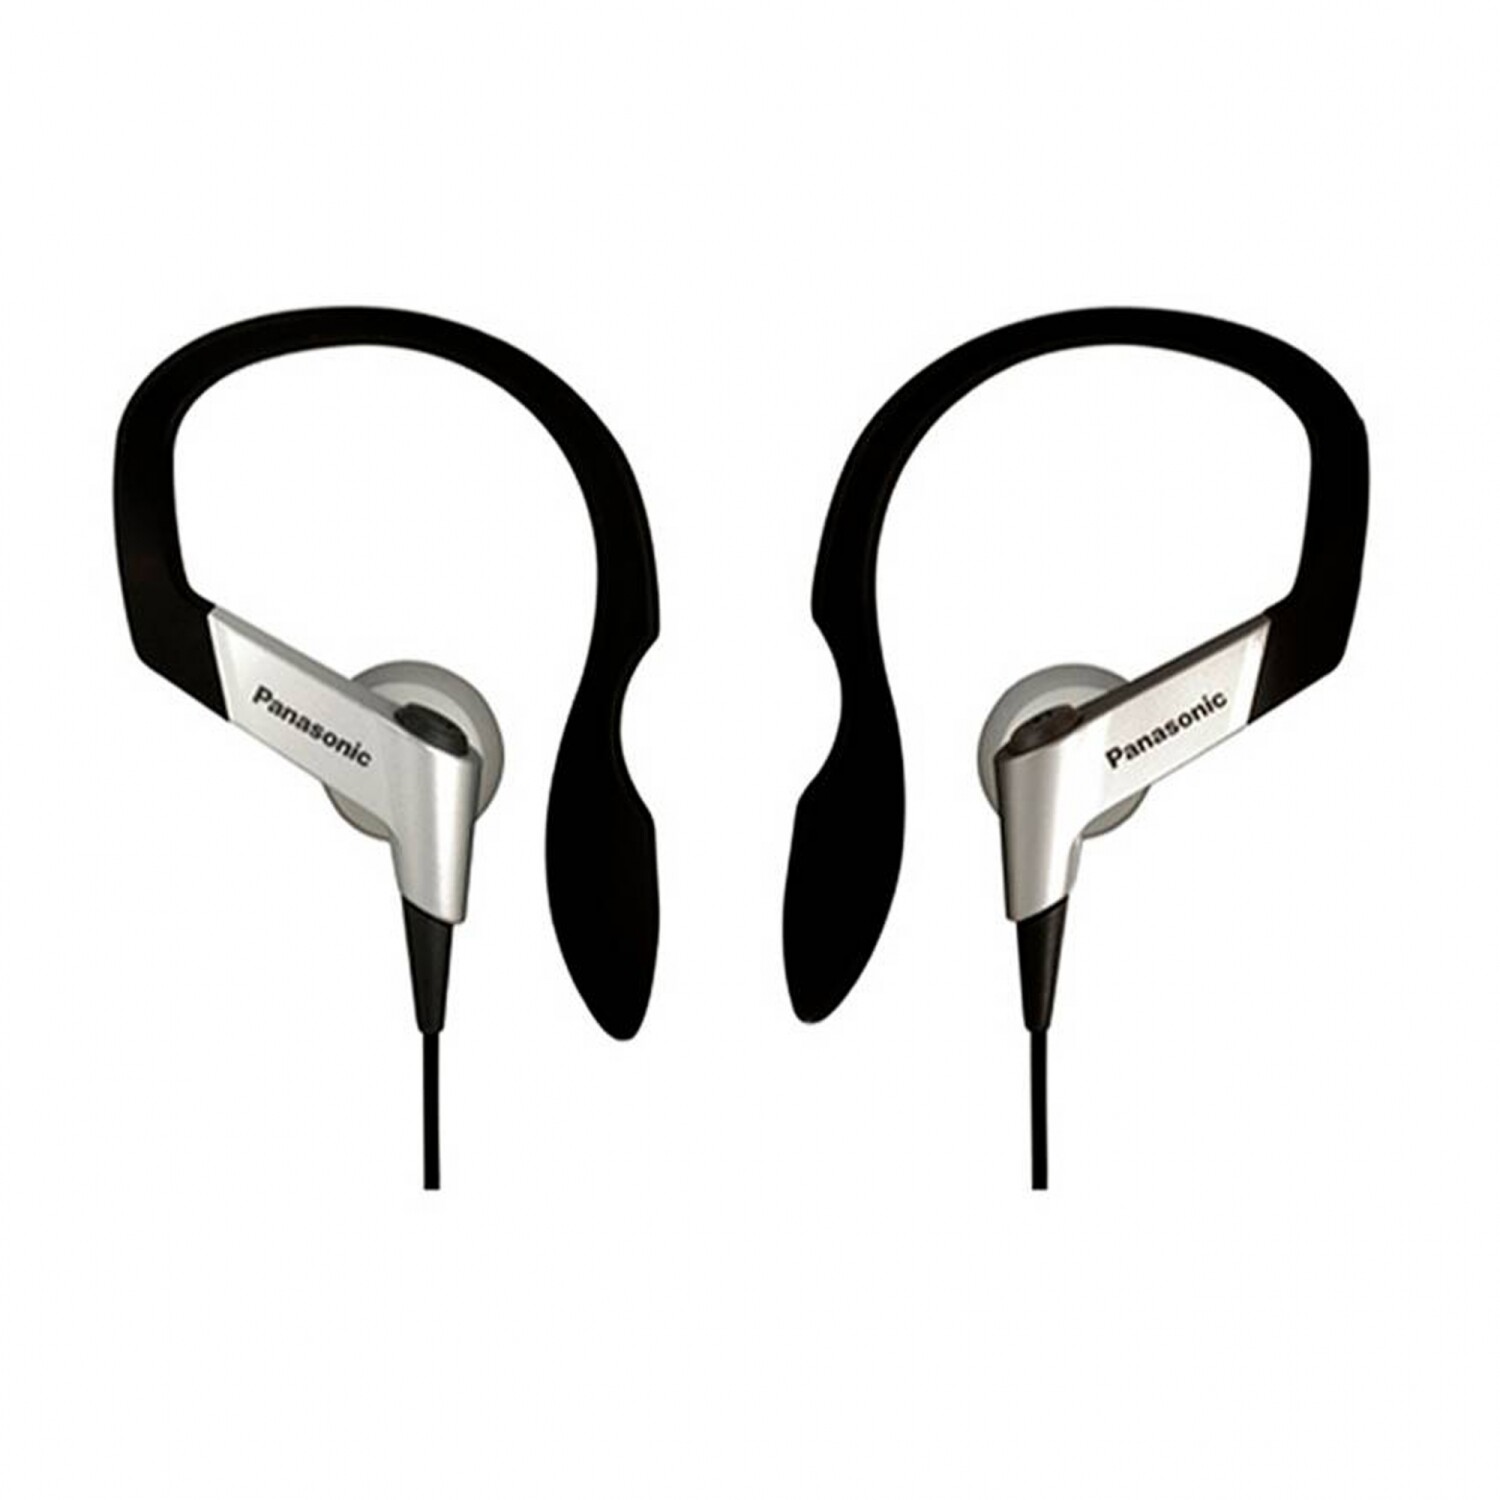 Auriculares Panasonic RP-HJE125E-K Negro - Auriculares in ear